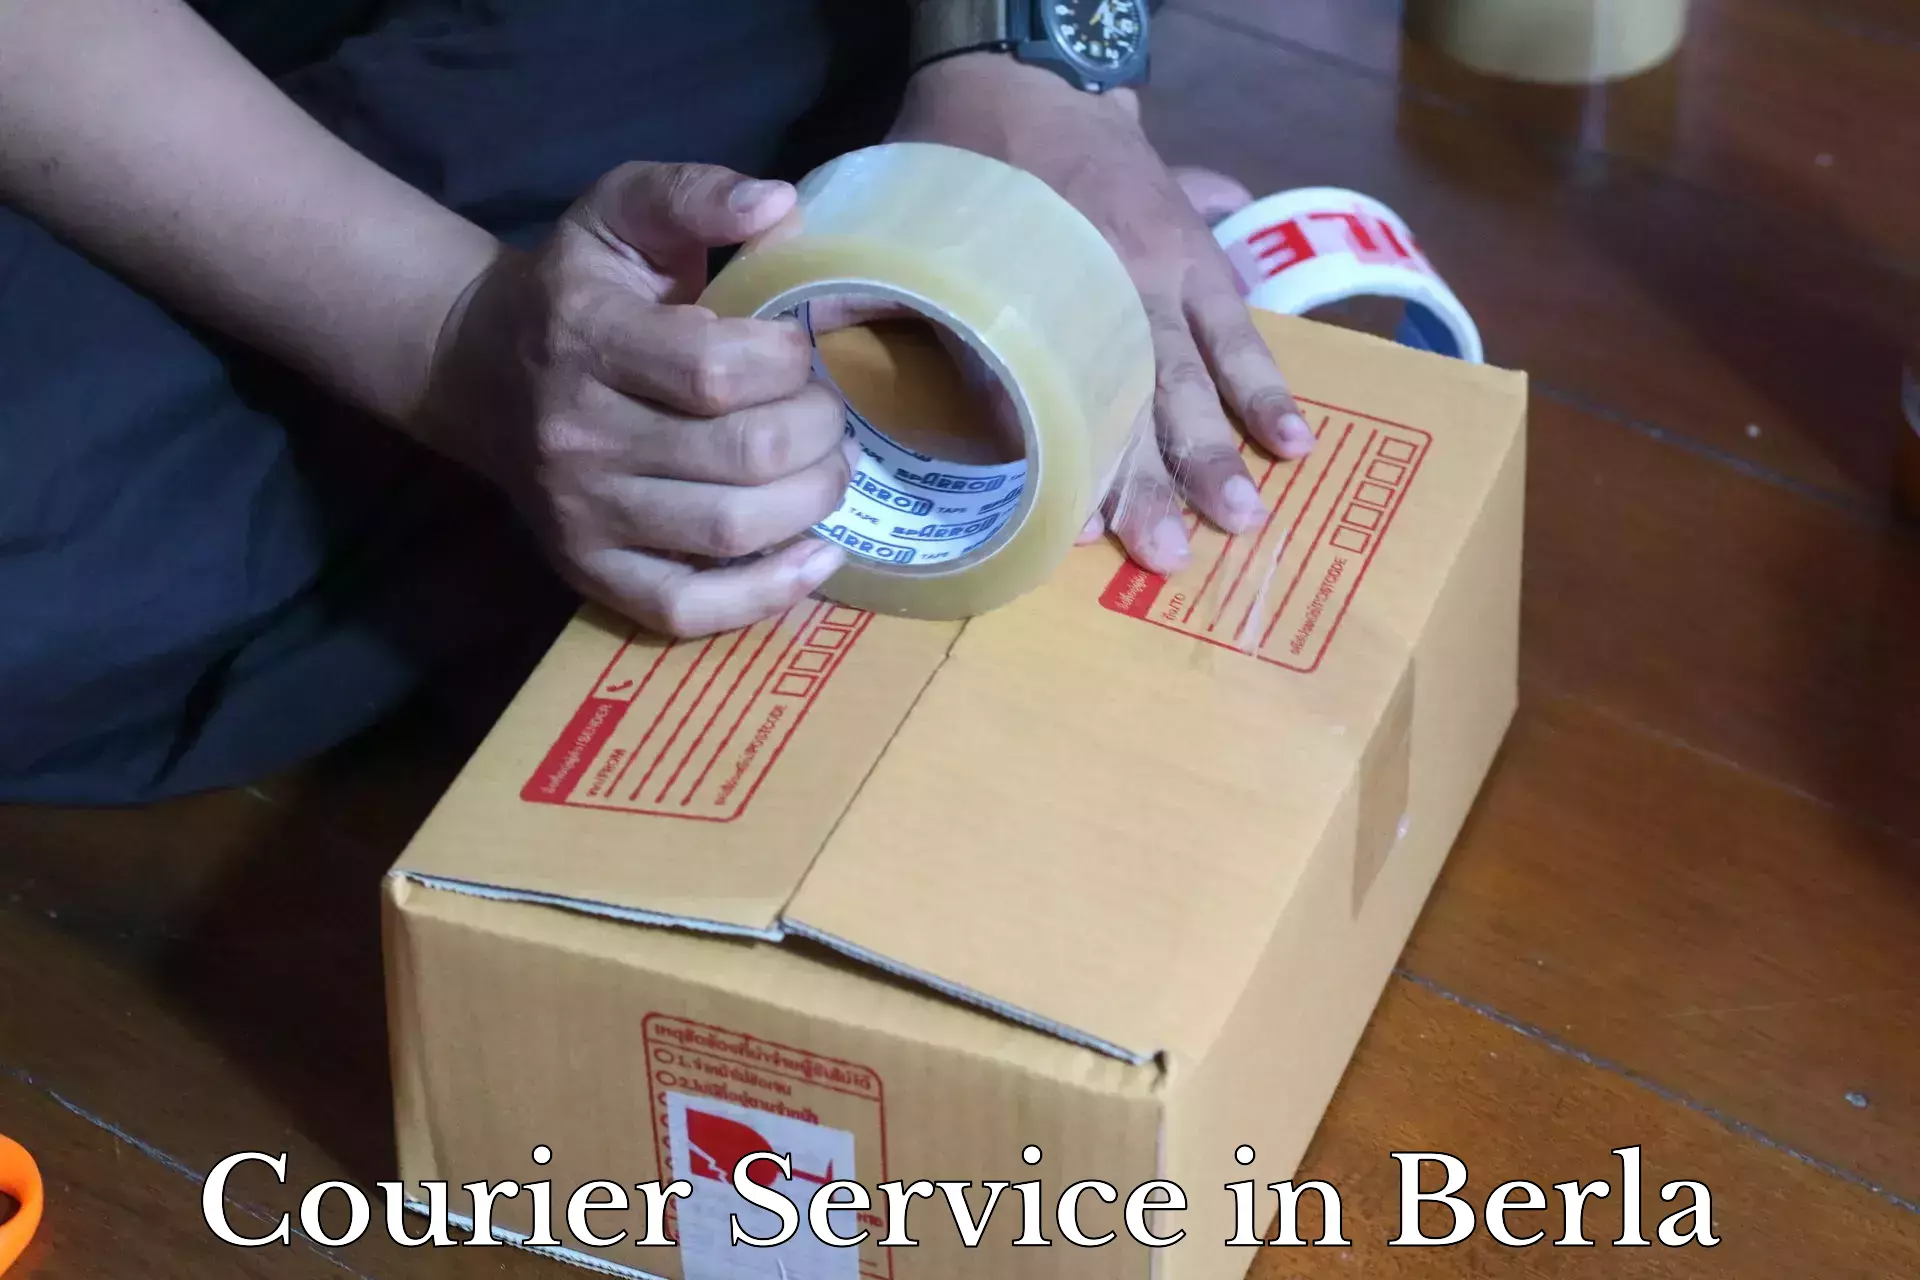 Sustainable courier practices in Berla